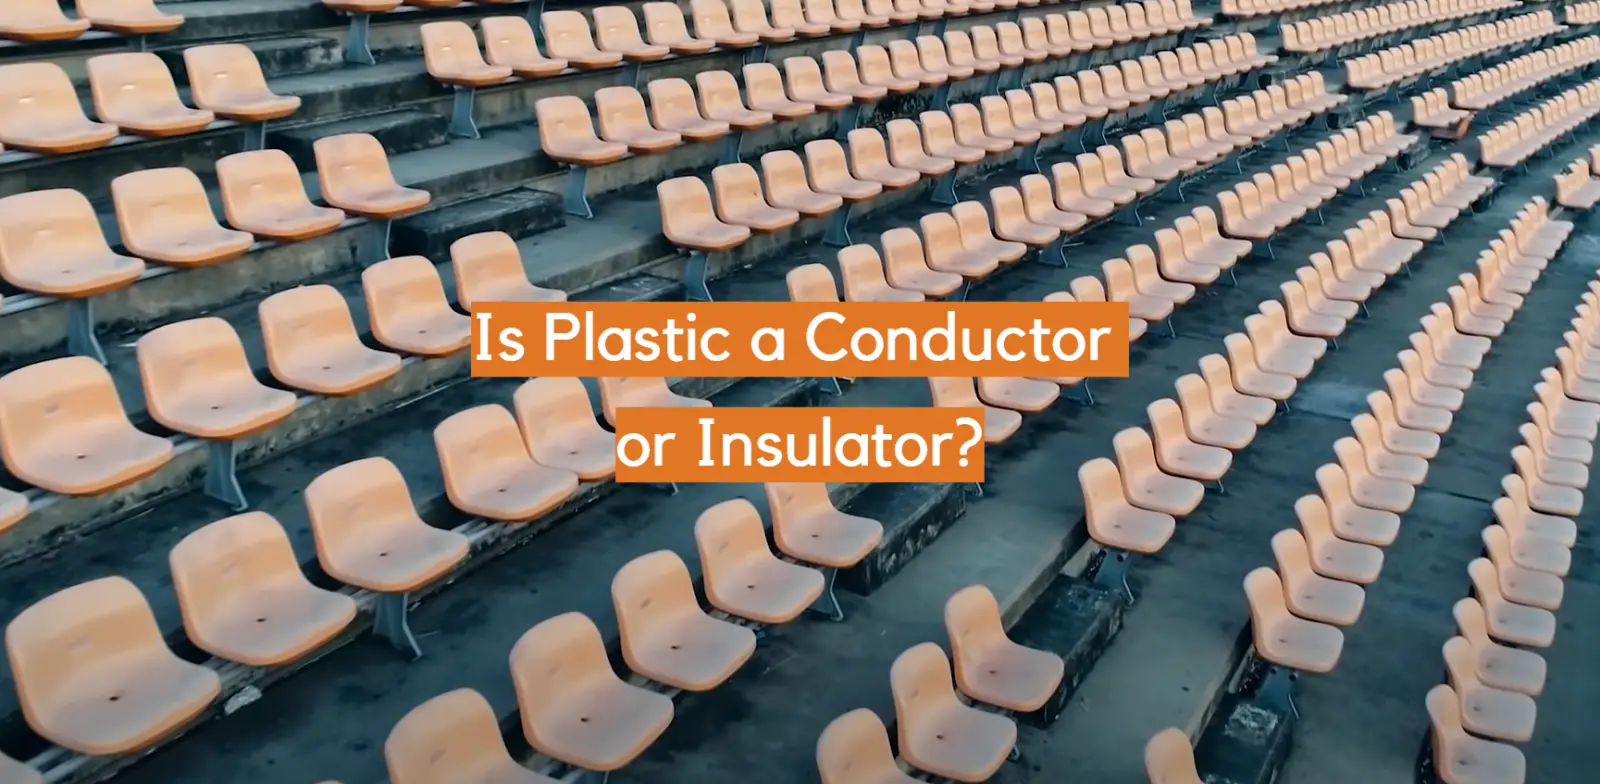 Is Plastic a Conductor or Insulator?